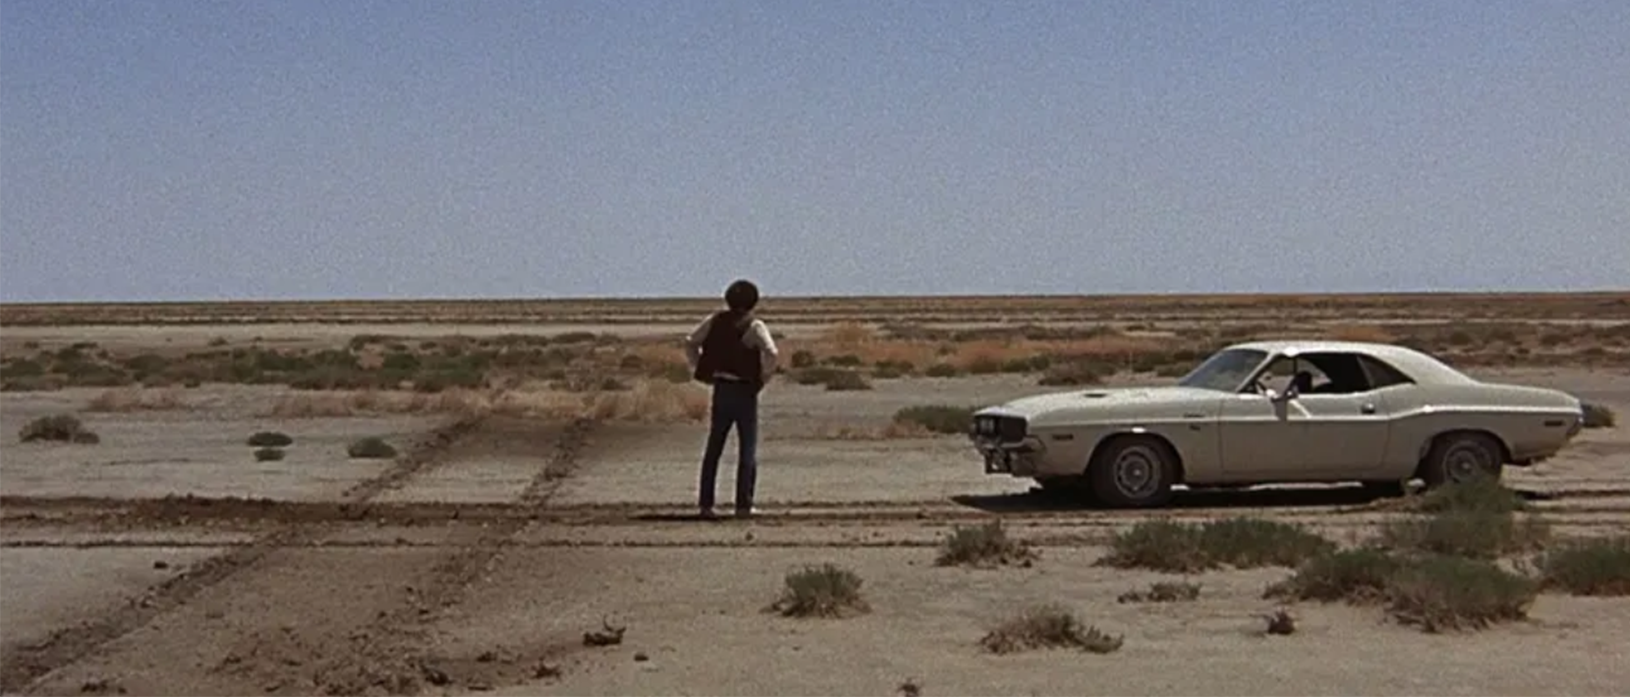 Man and car in the desert